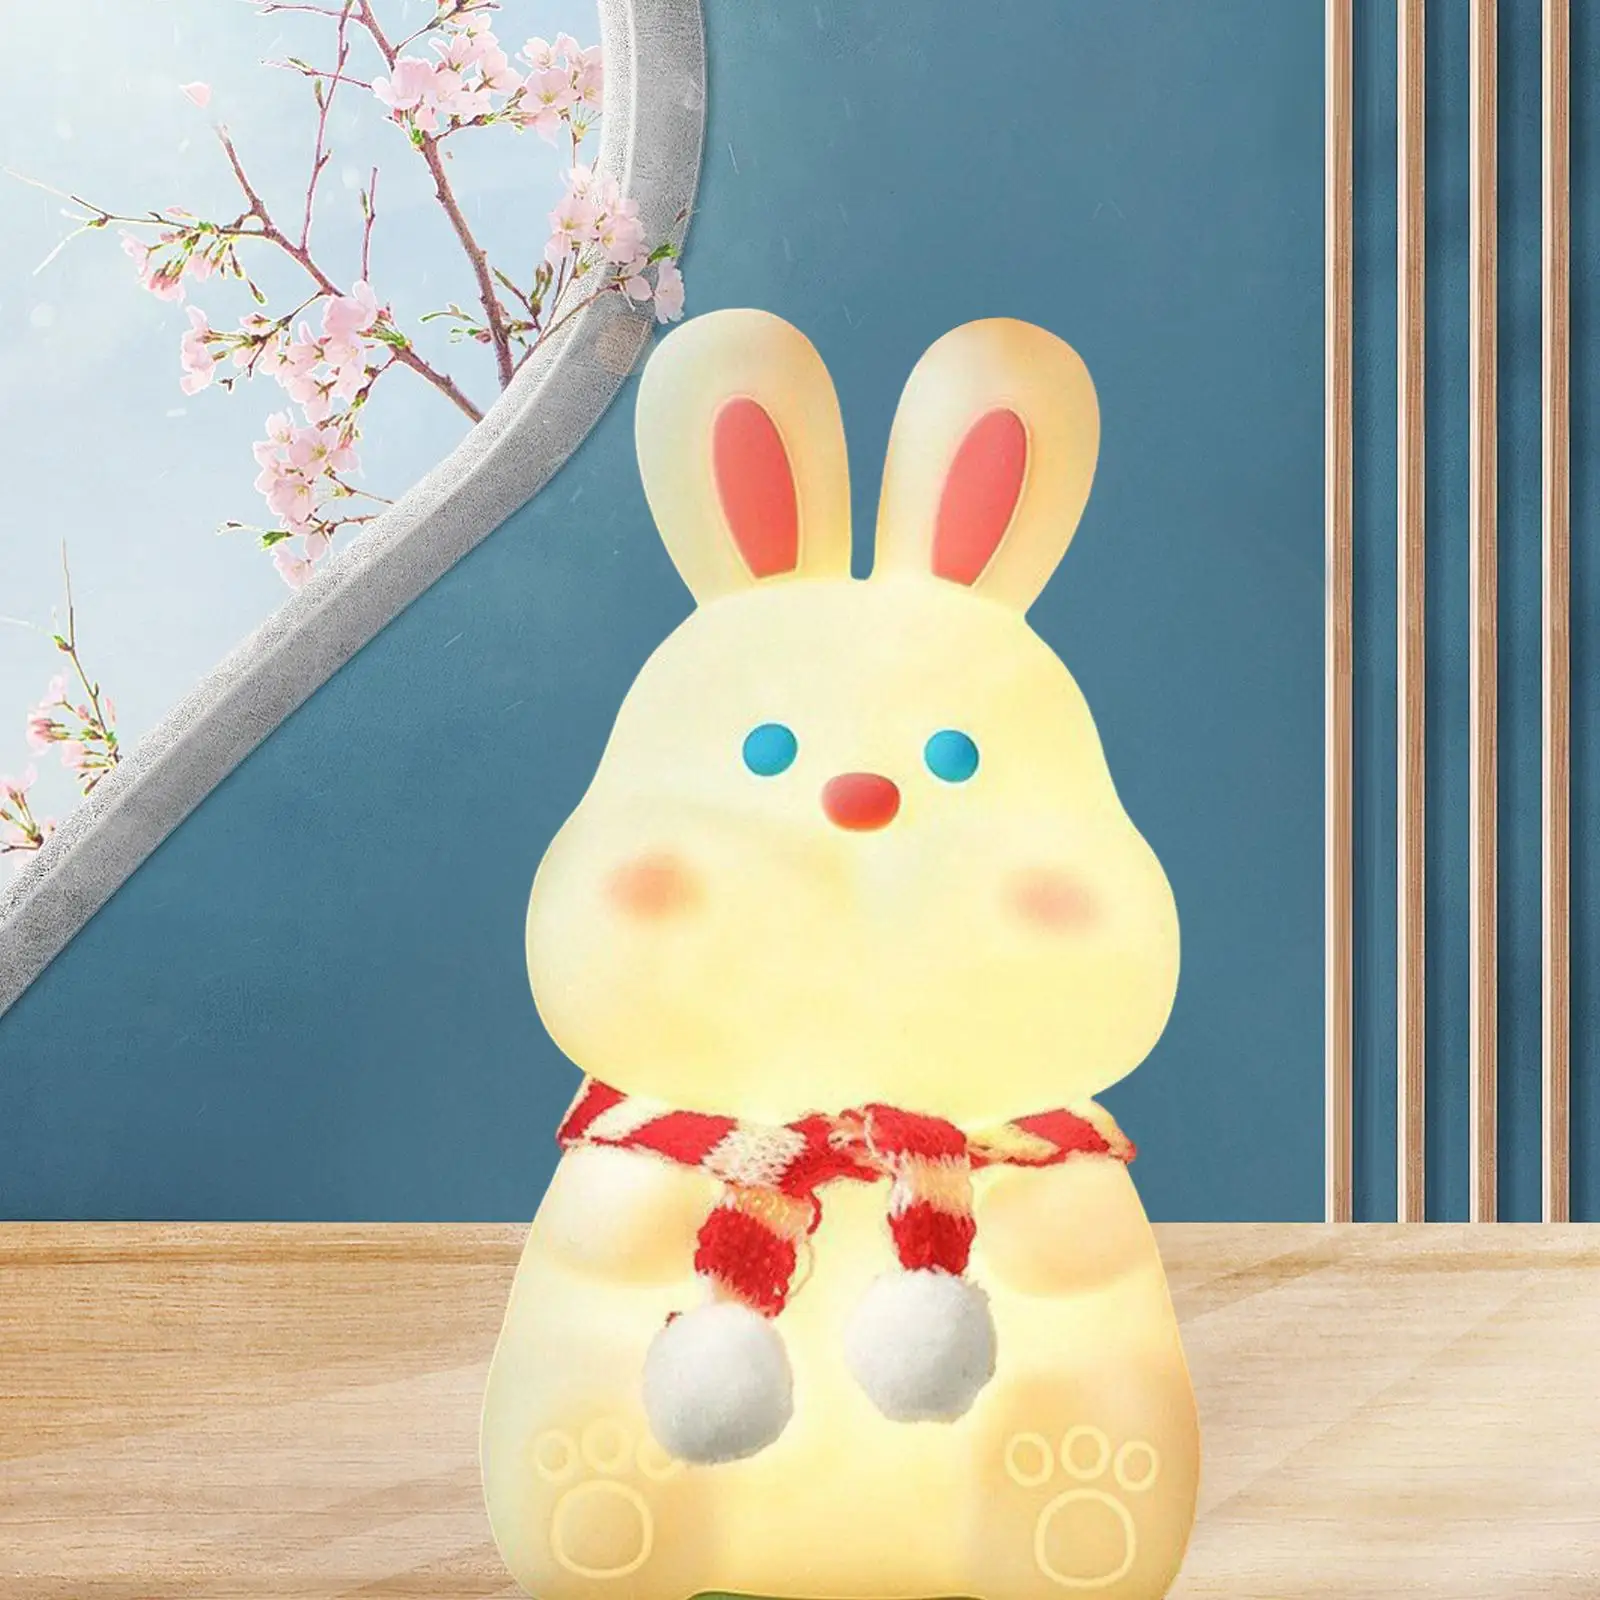 Rabbit Shaped Night Light Portable Color Changing Nightlight Cute Bedside Lamp for Tabletop Toddler Children Breastfeeding Baby